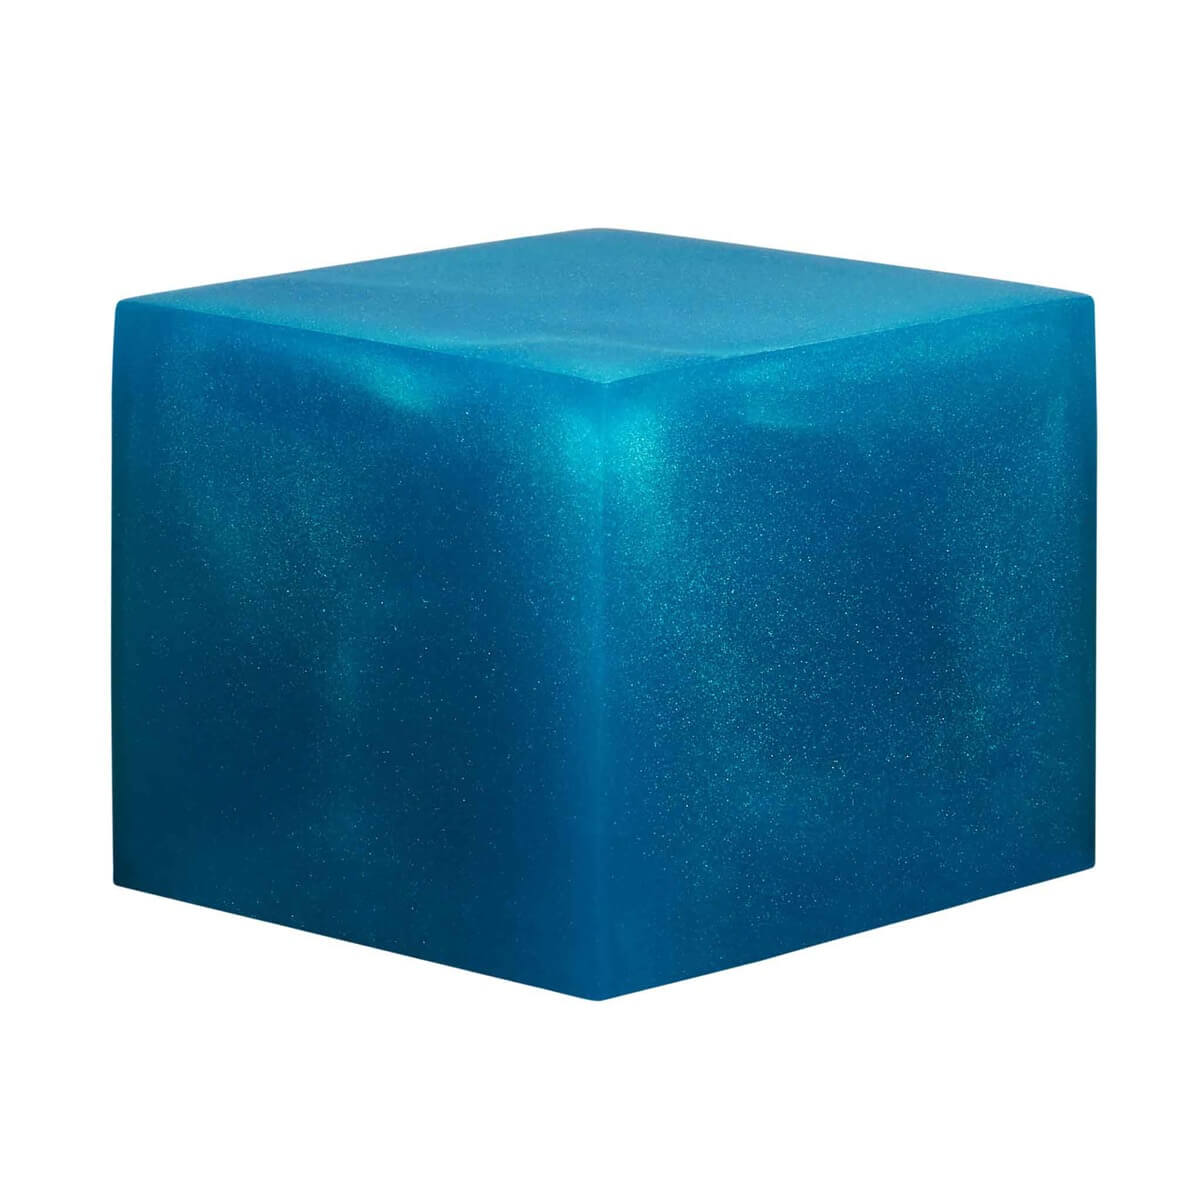 A resin cube made with the Hypnotic Peacock Mica Powder Pigment by Pigmently.